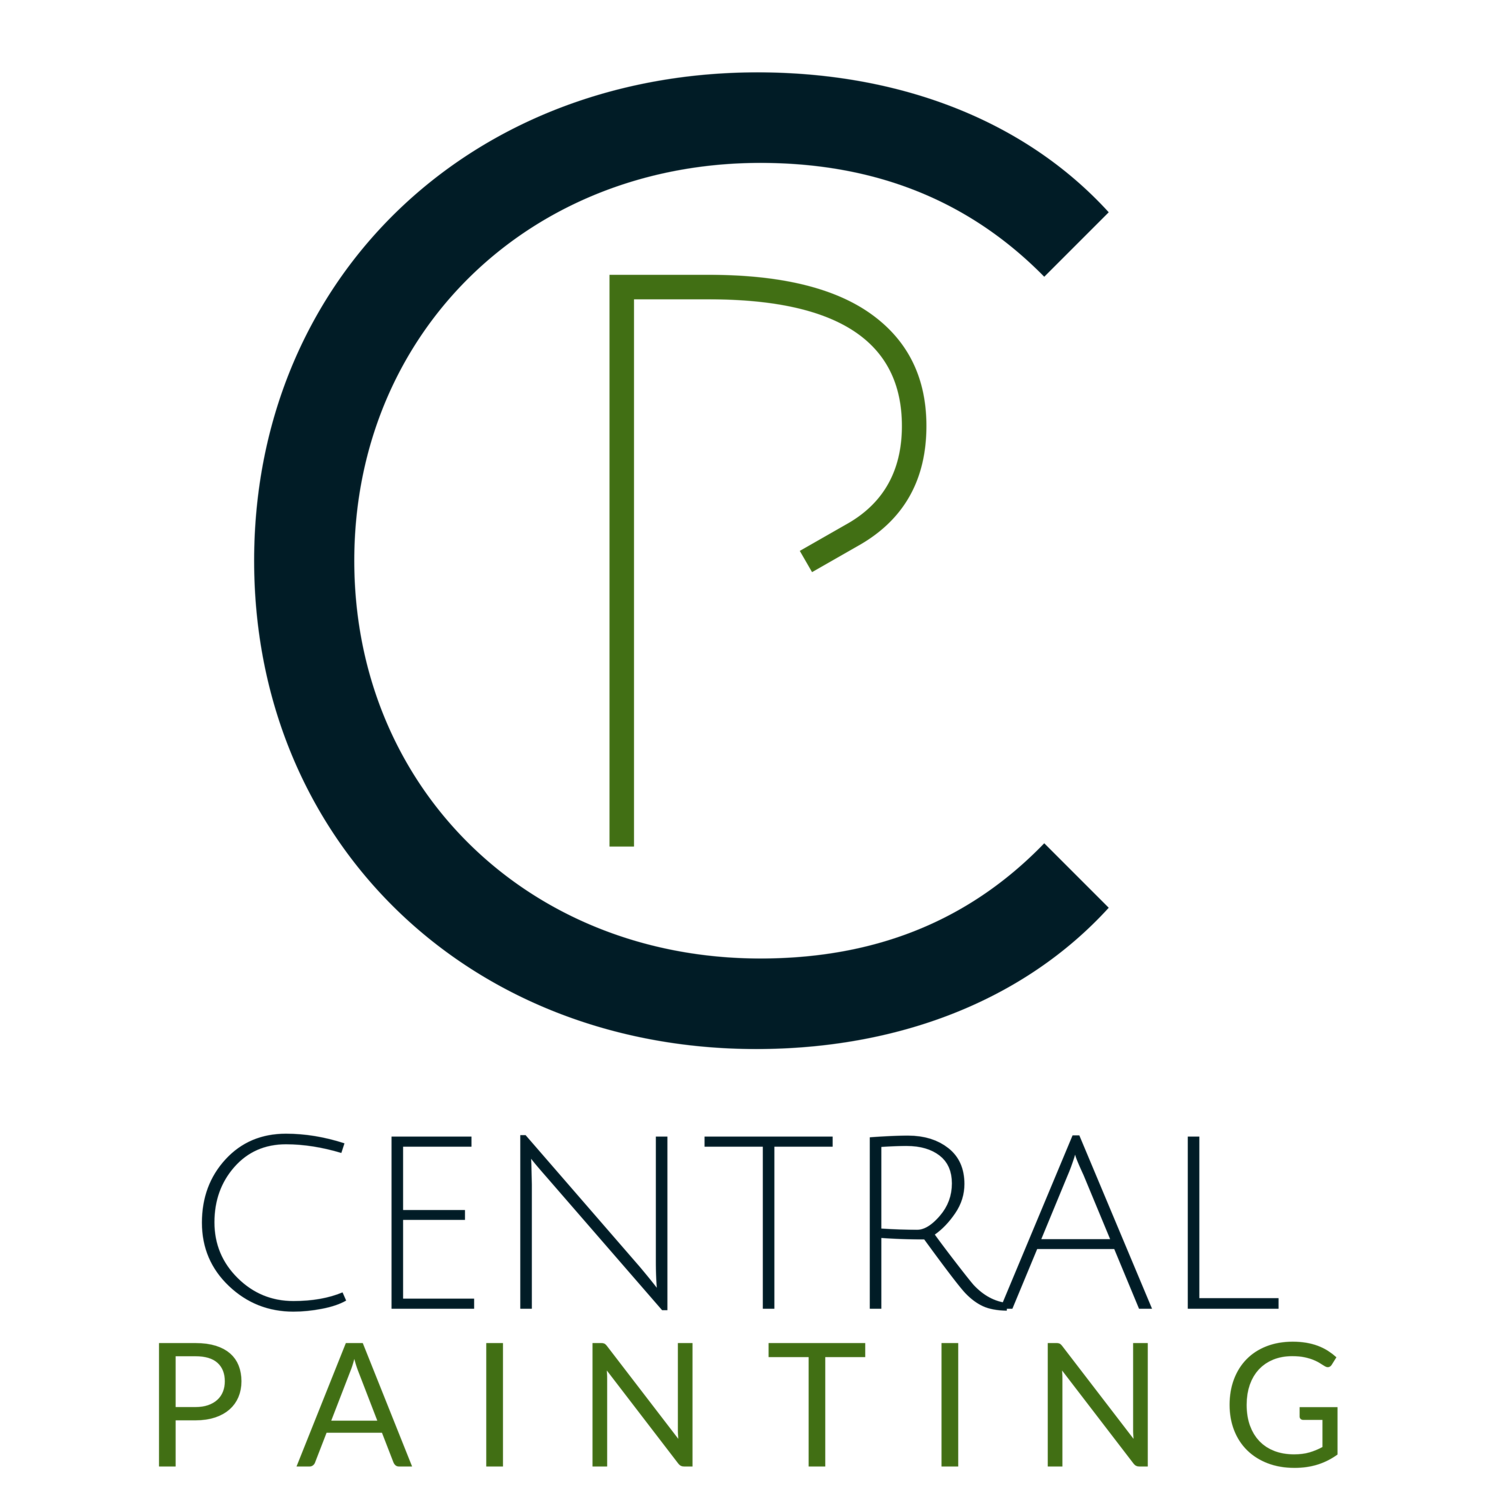 CENTRAL PAINTING